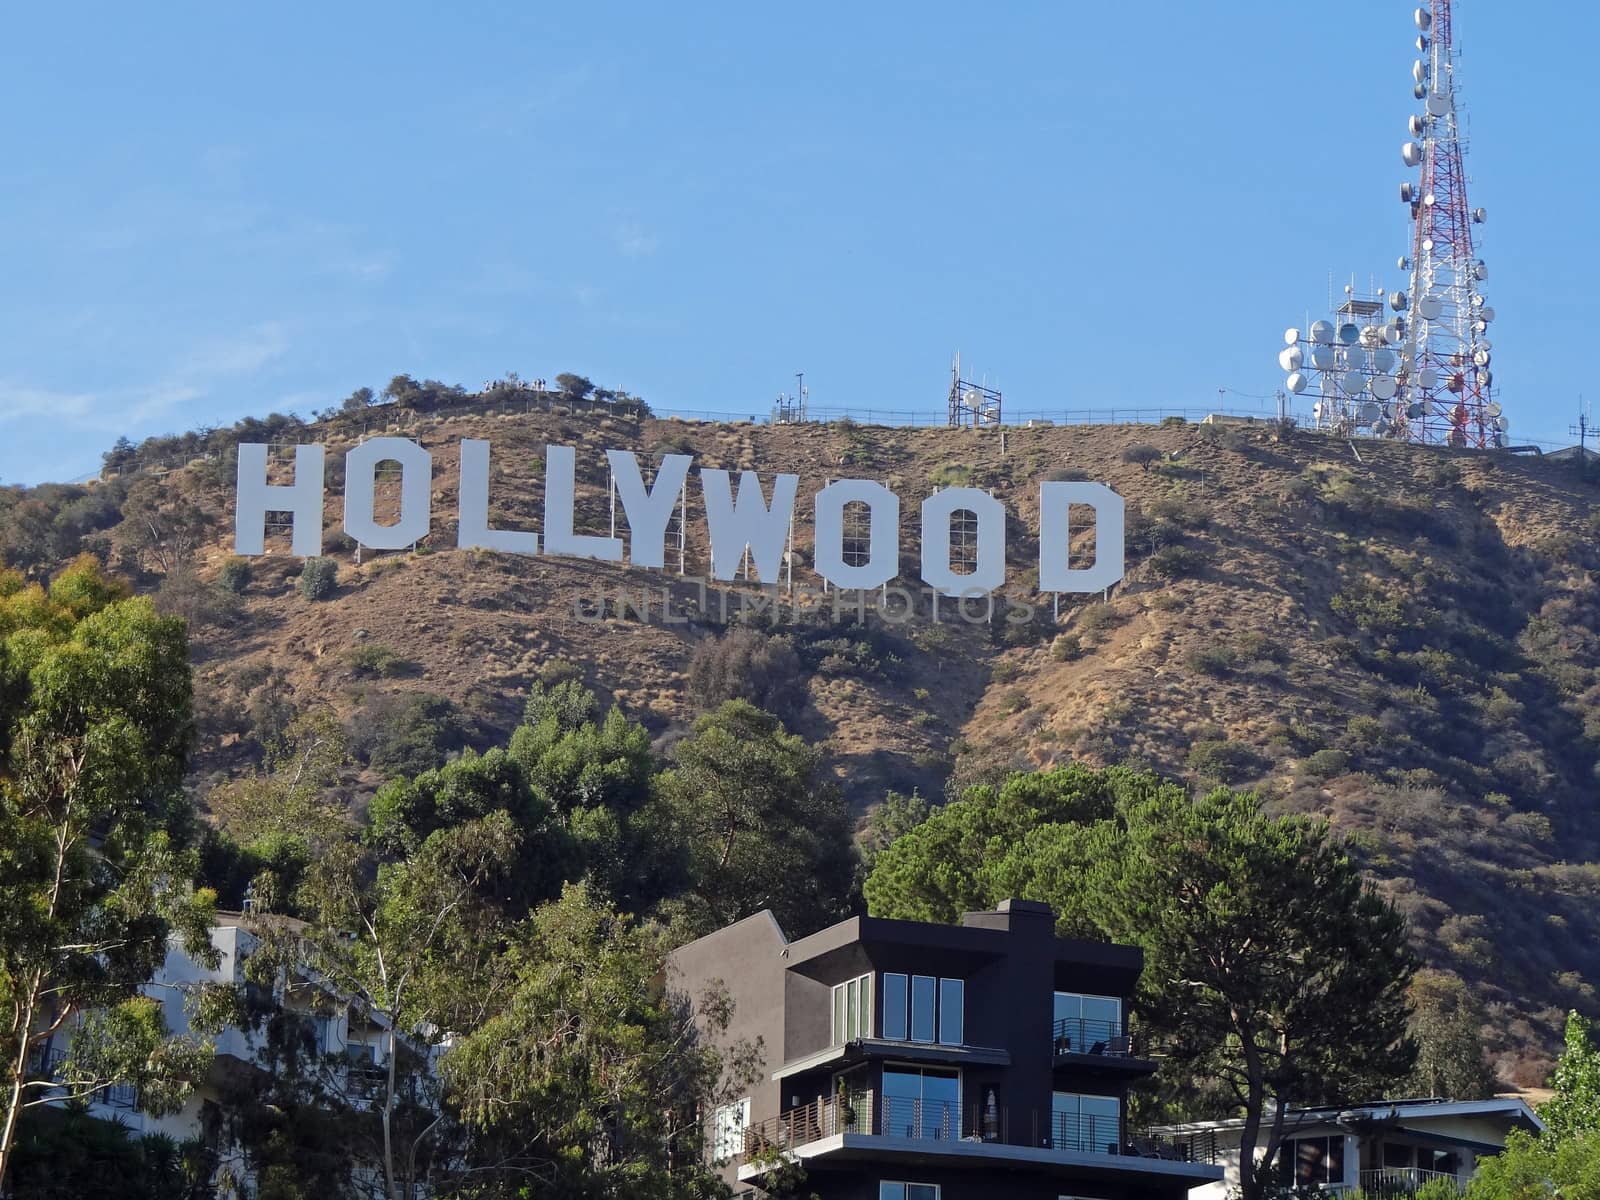 Hollywood signs by gegelaphoto